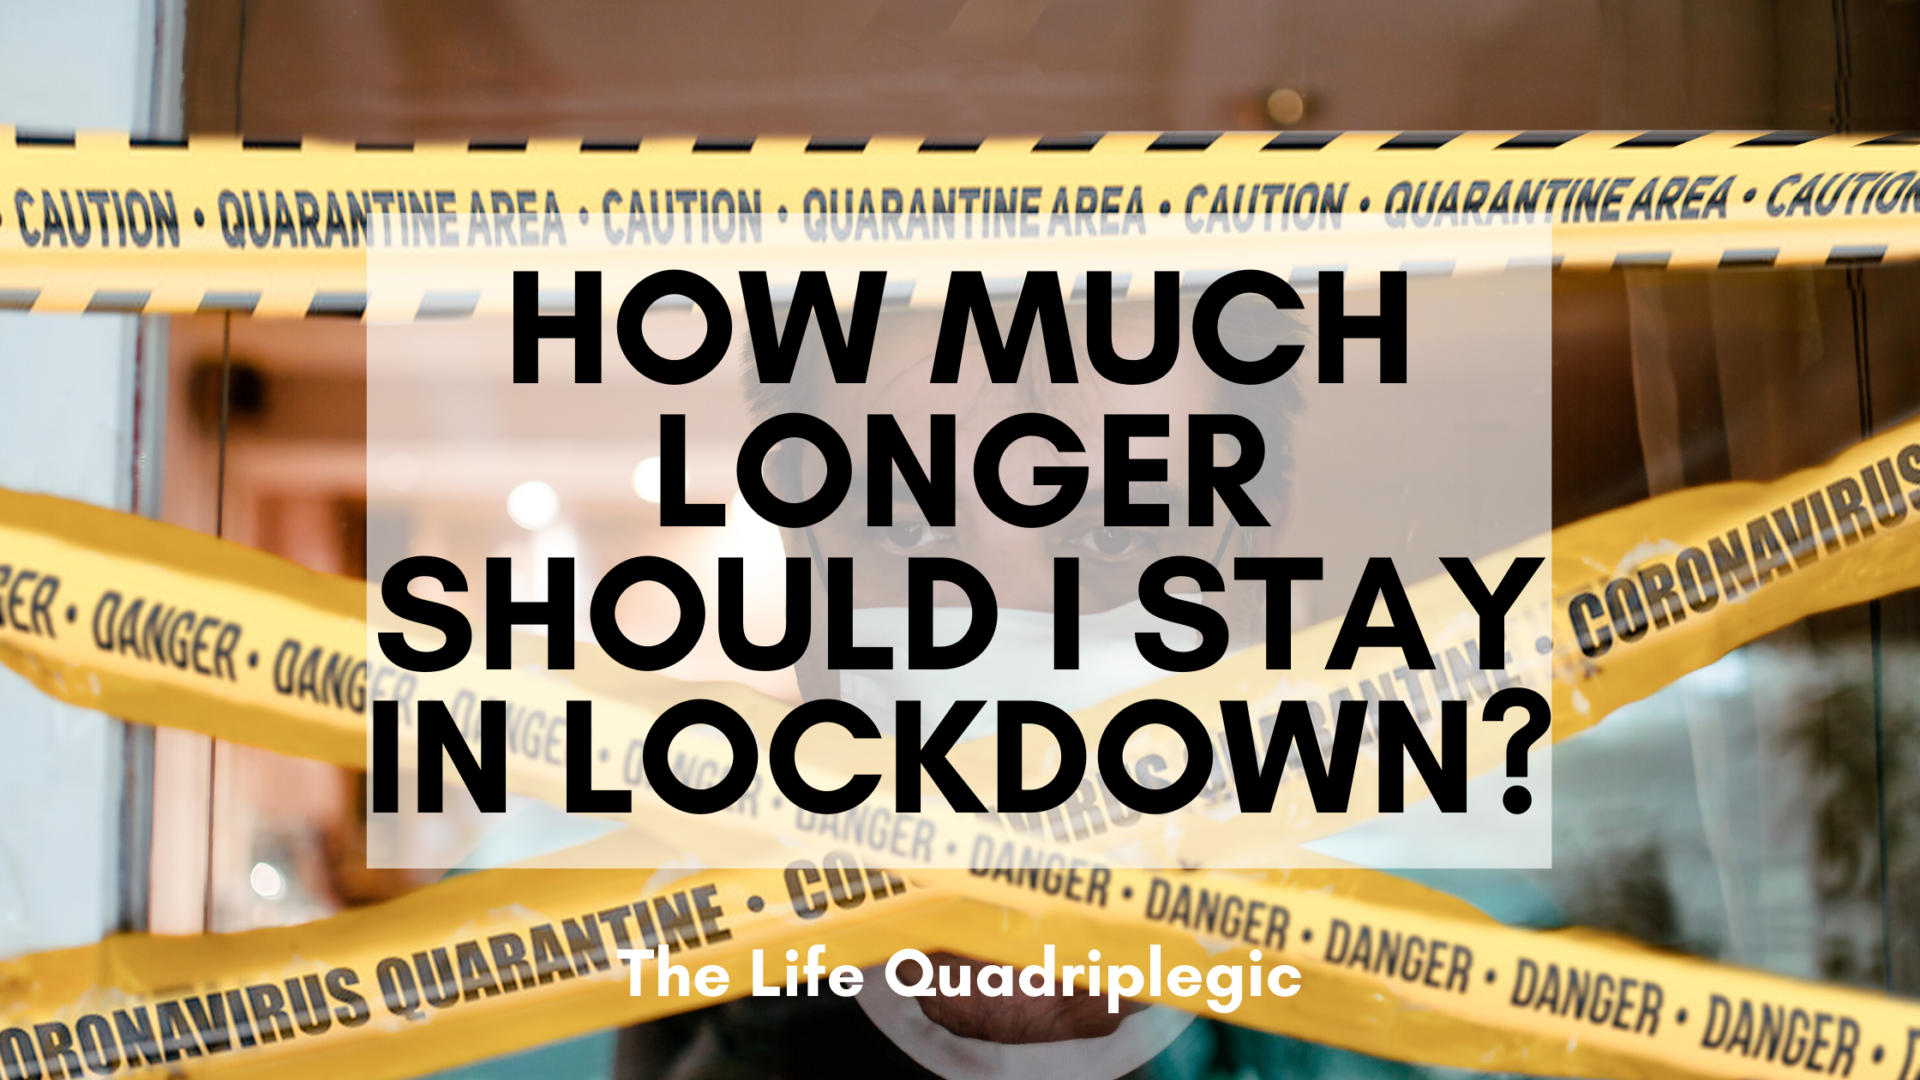 How much longer should I stay in lockdown?